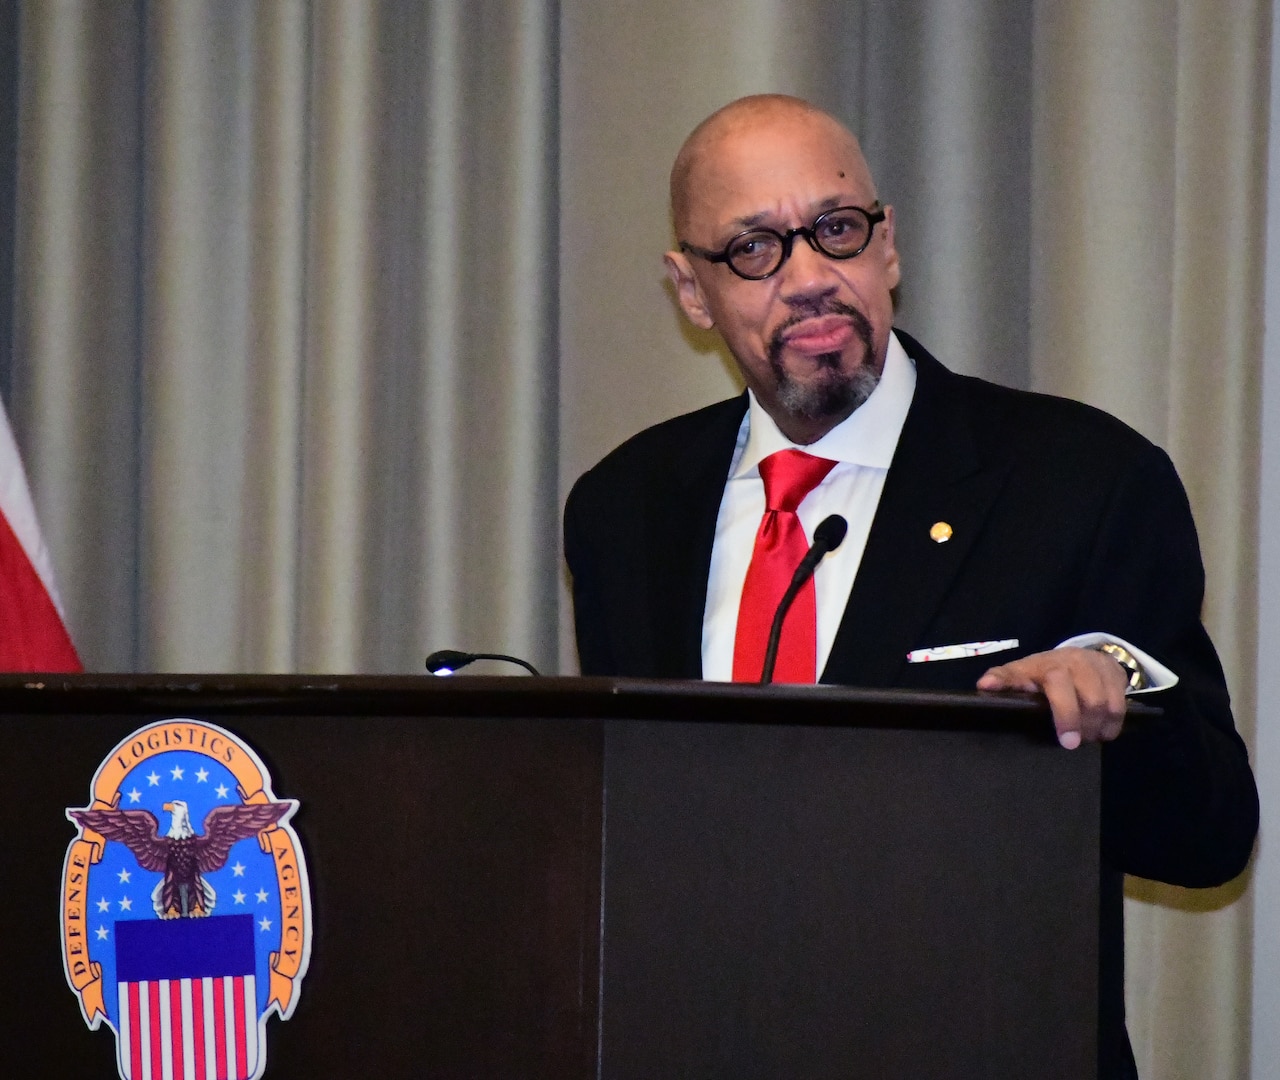 DLA Distribution hears from distinguished speaker and author during Black History Month event